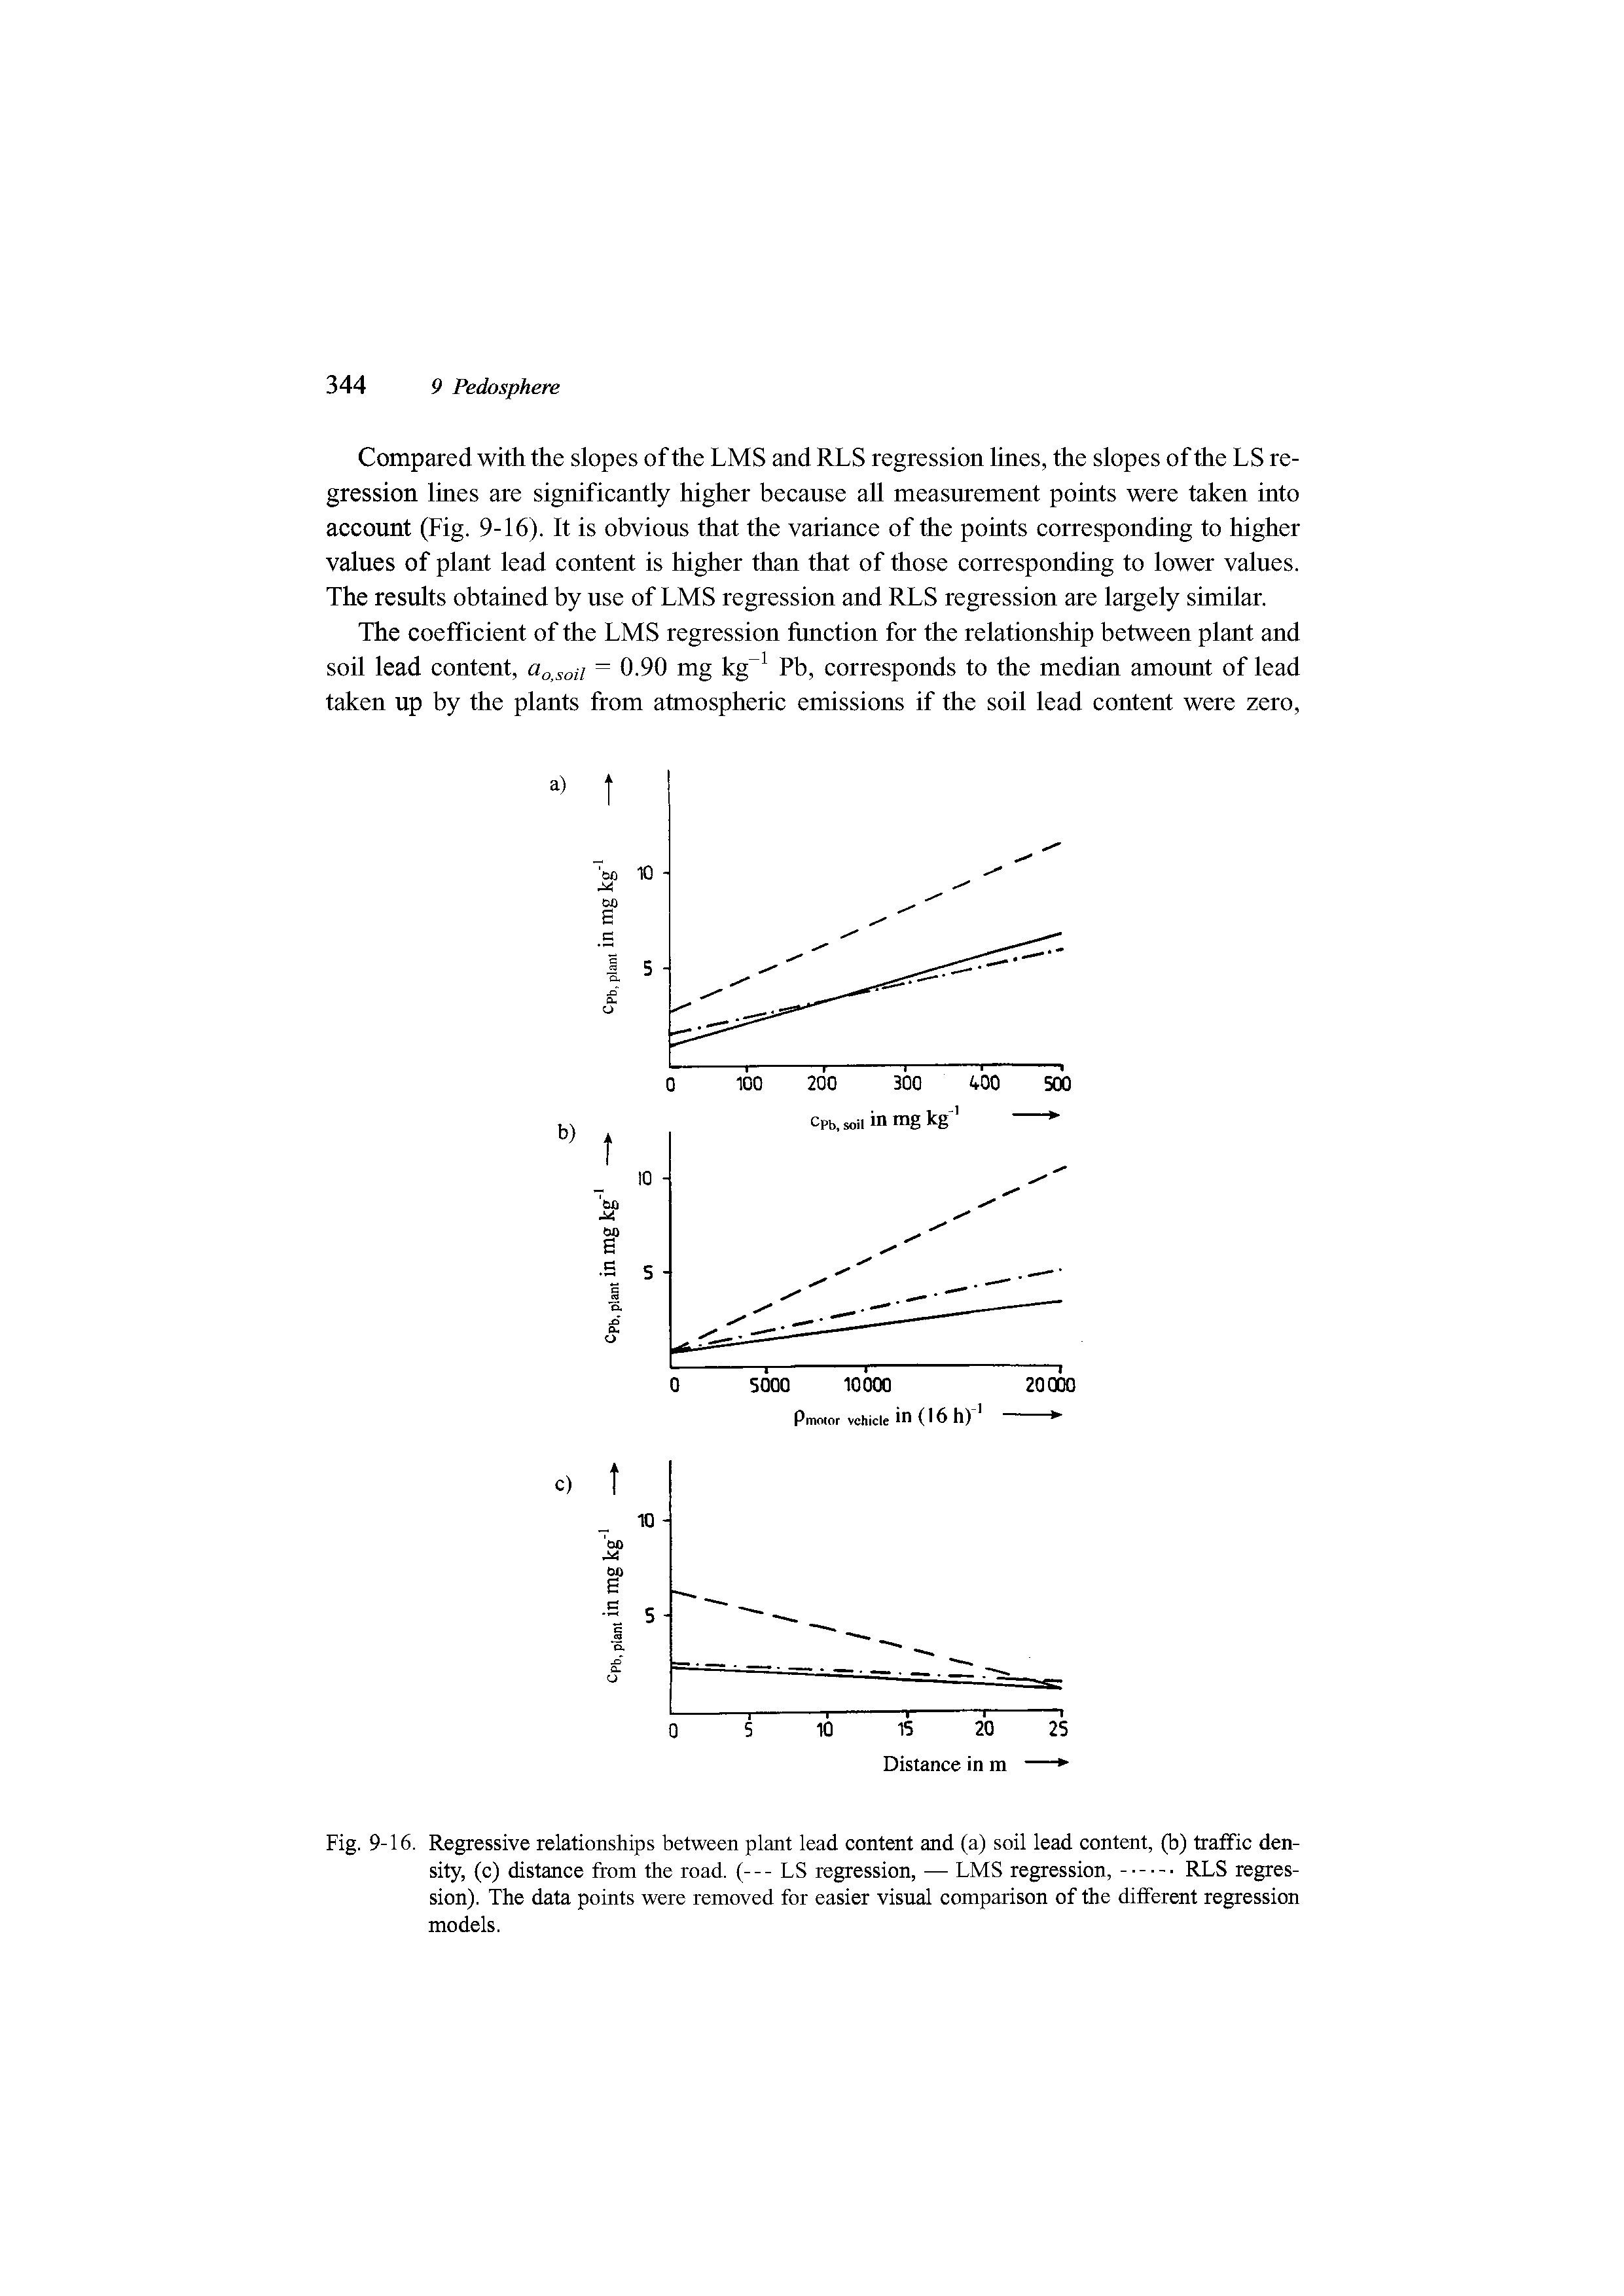 Fig. 9-16. Regressive relationships between plant lead content and (a) soil lead content, (b) traffic density, (c) distance from the road. (--- LS regression, — LMS regression,----------------RLS regres-...